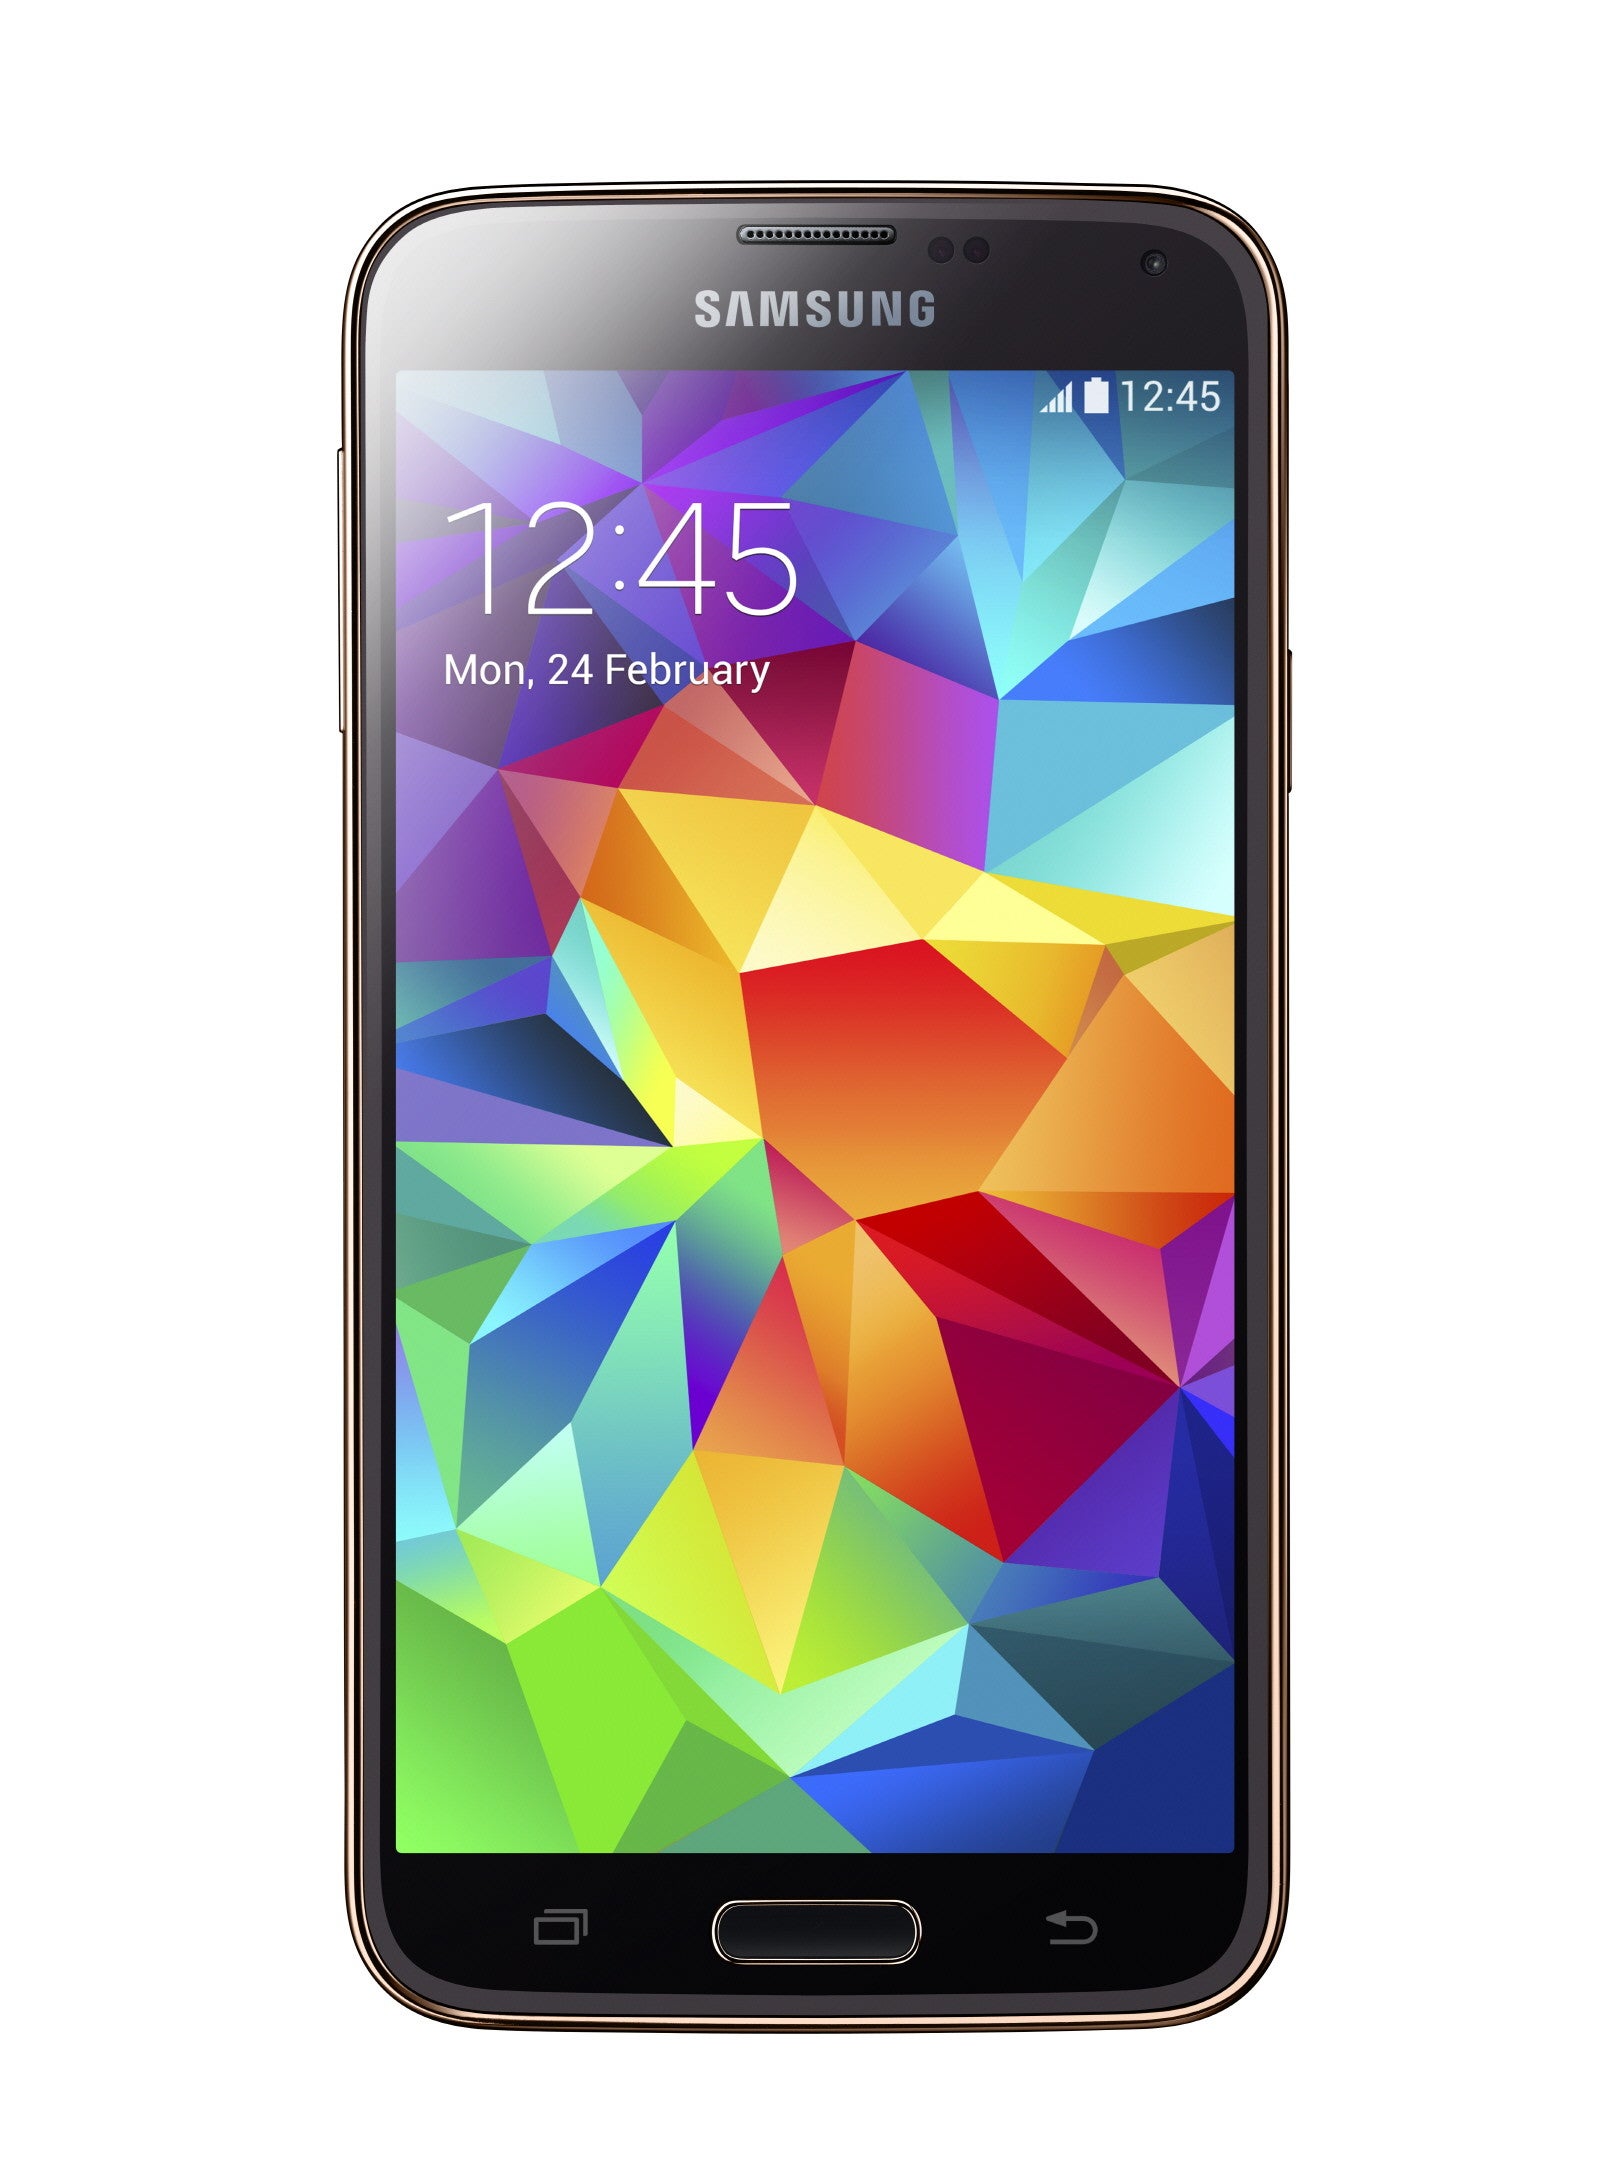 Samsung Galaxy S5: Samsung tries offering useful updates over bloat